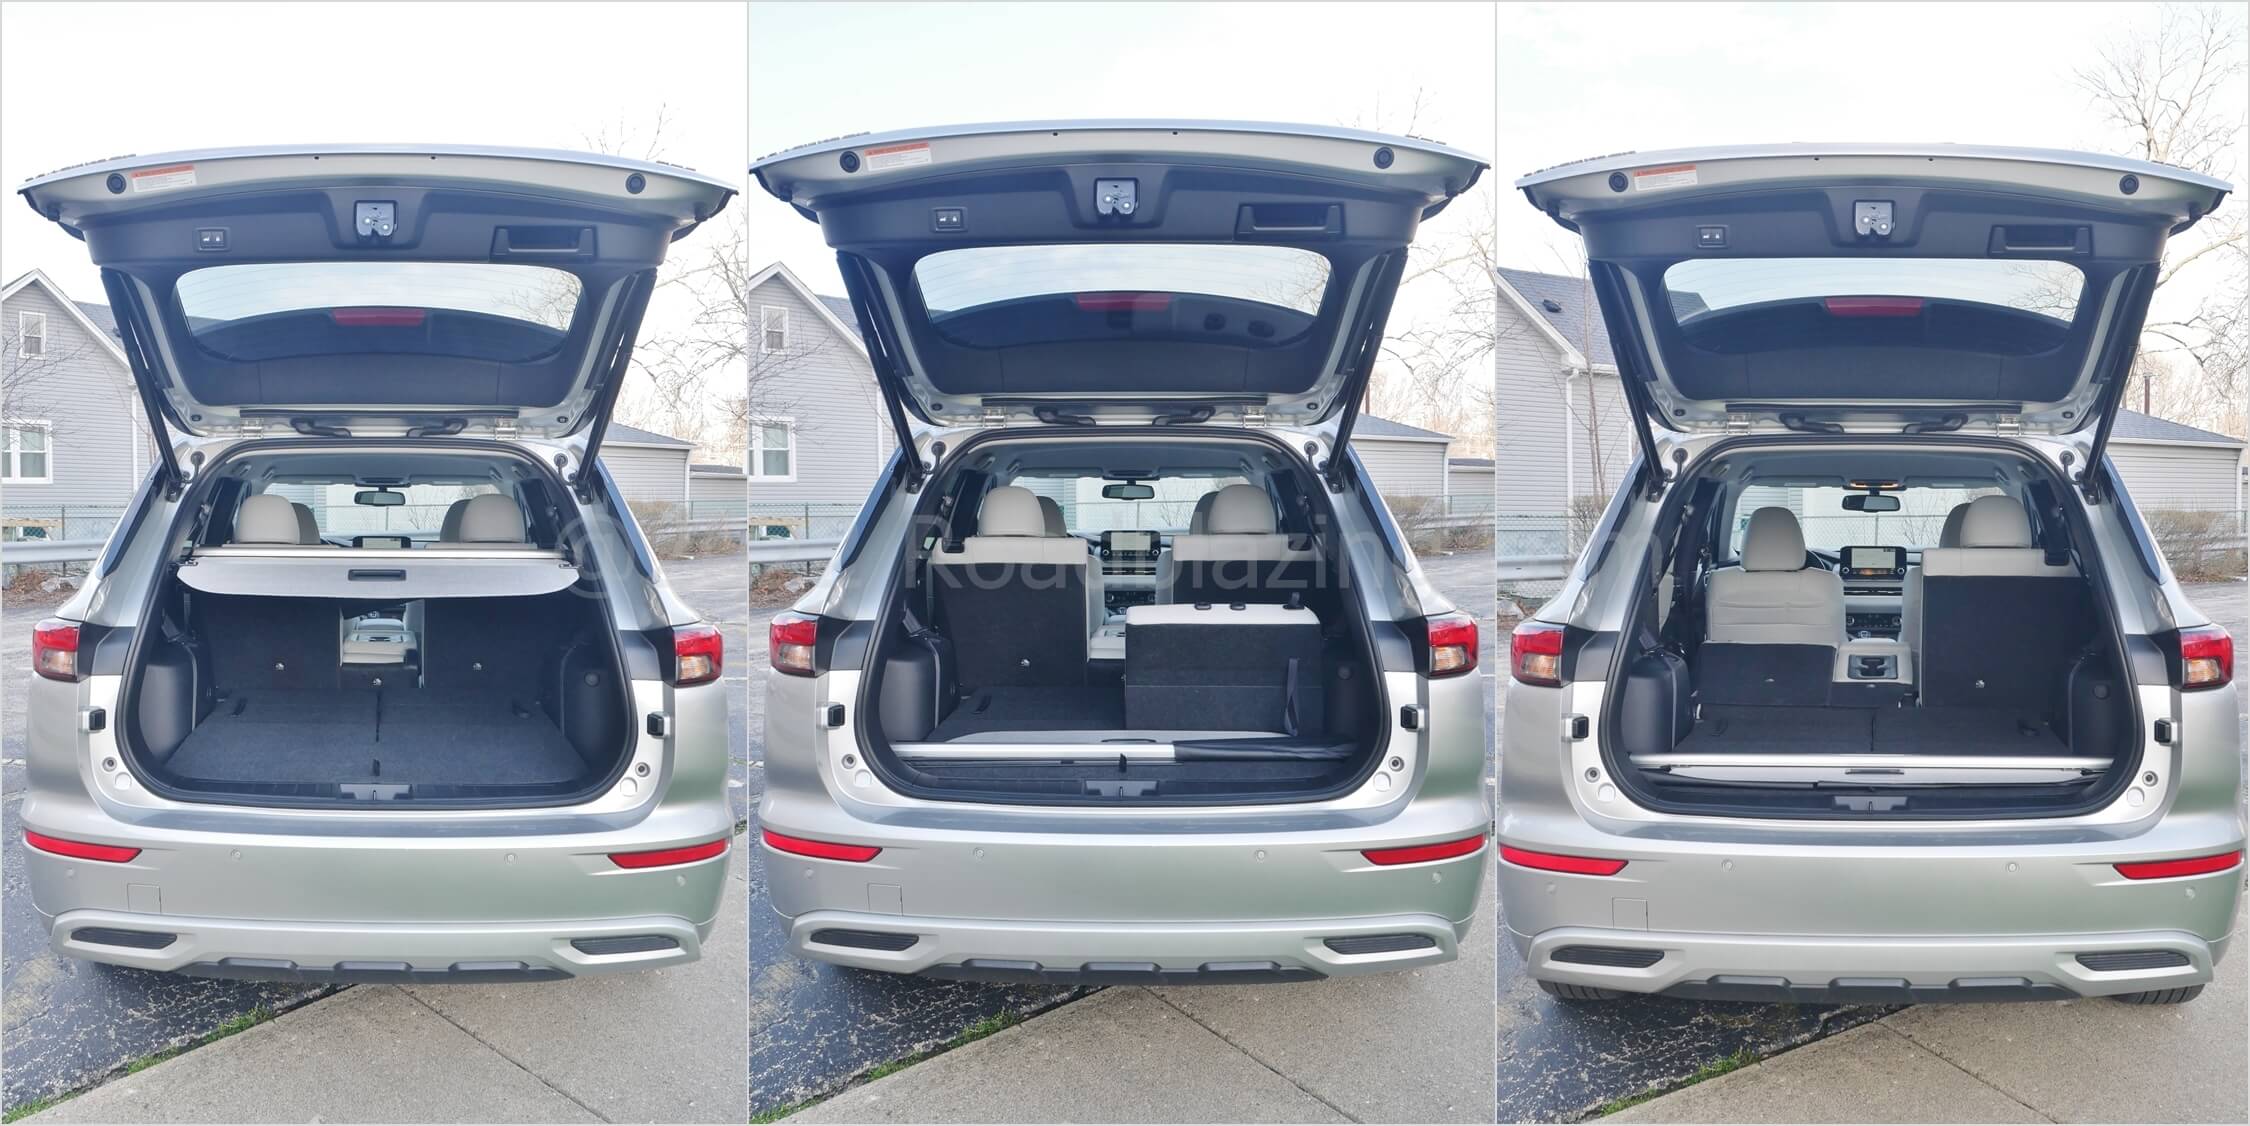 2022 Mitsubishi Outlander 2.5L SEL AWC: versatile cargo hold configuration features low load liftover